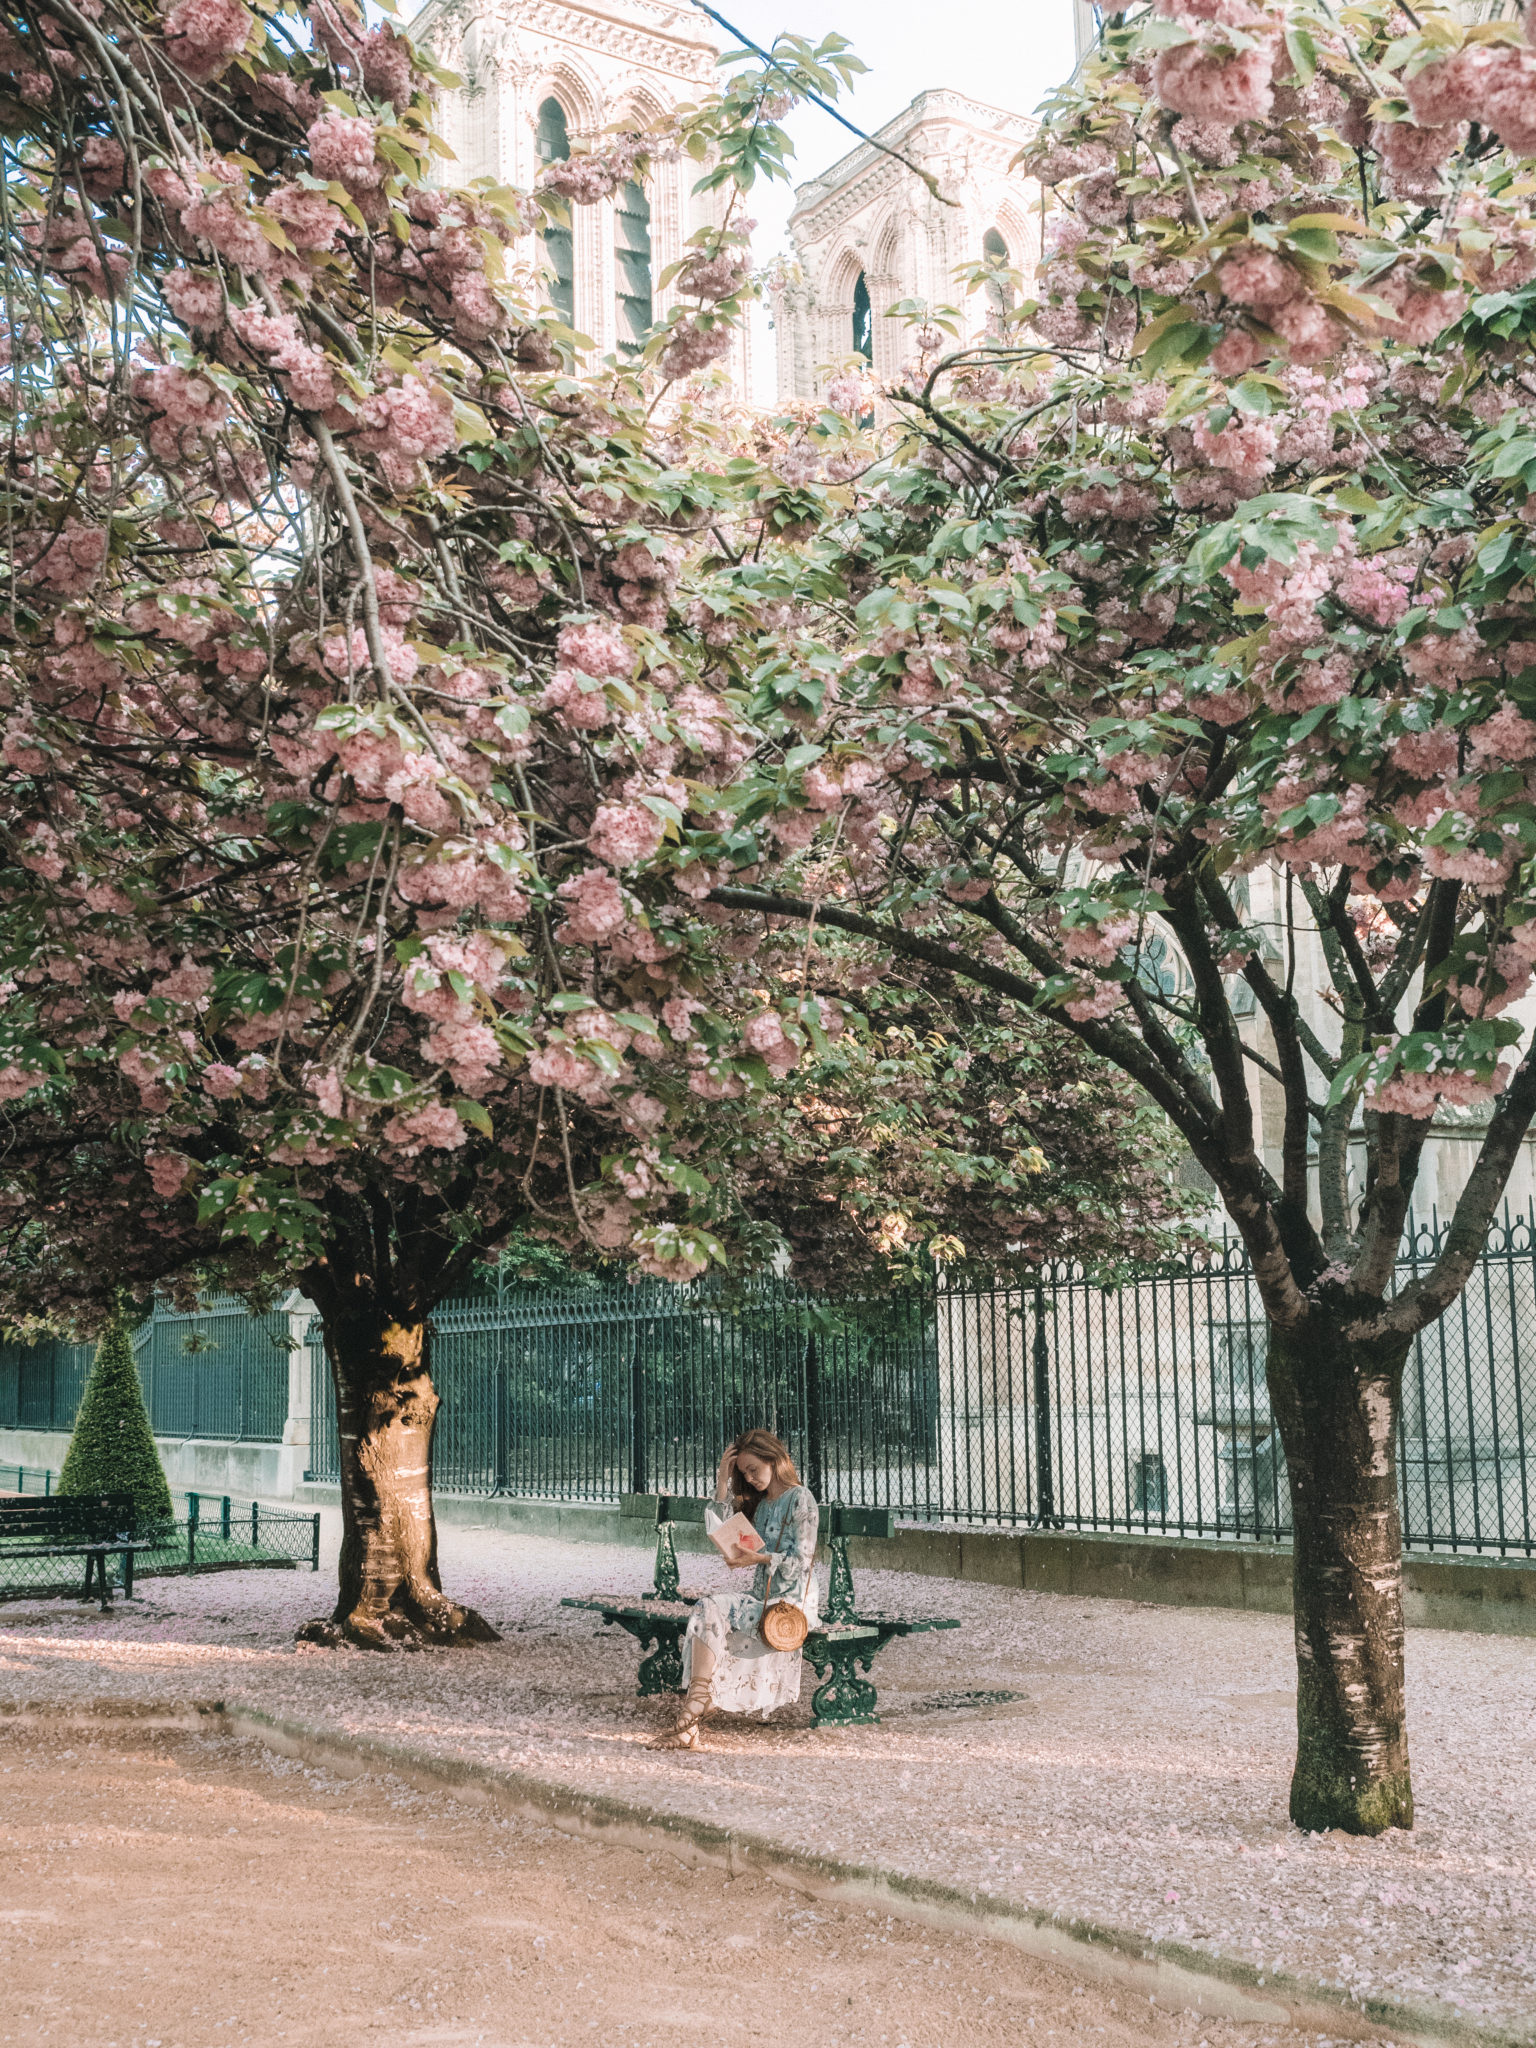 Where to find the best cherry blossoms in Paris | WORLD OF WANDERLUST